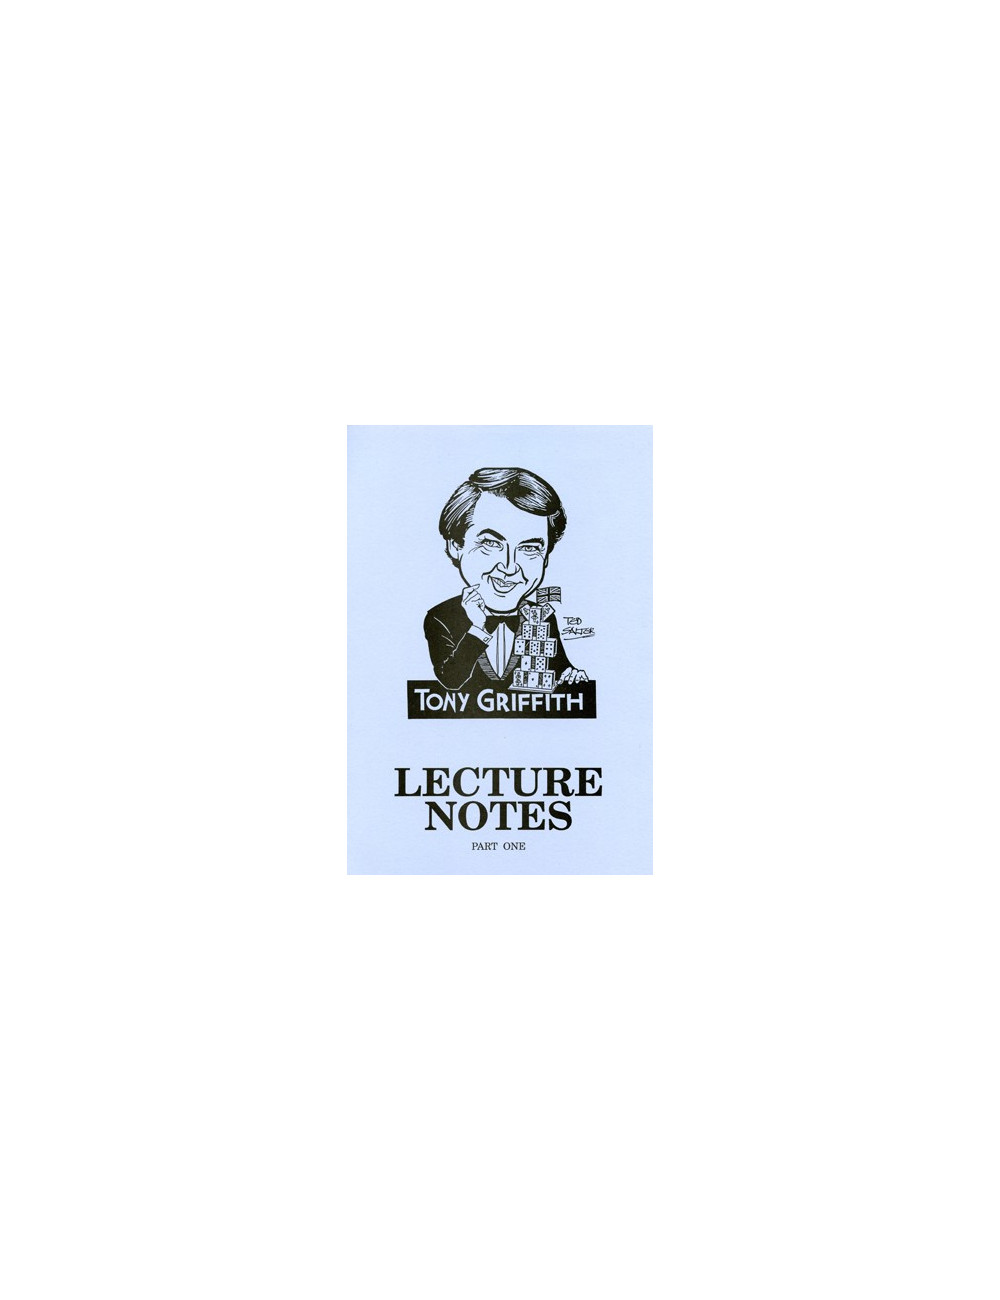 LECTURE NOTES – PART ONE (Tony Griffith)